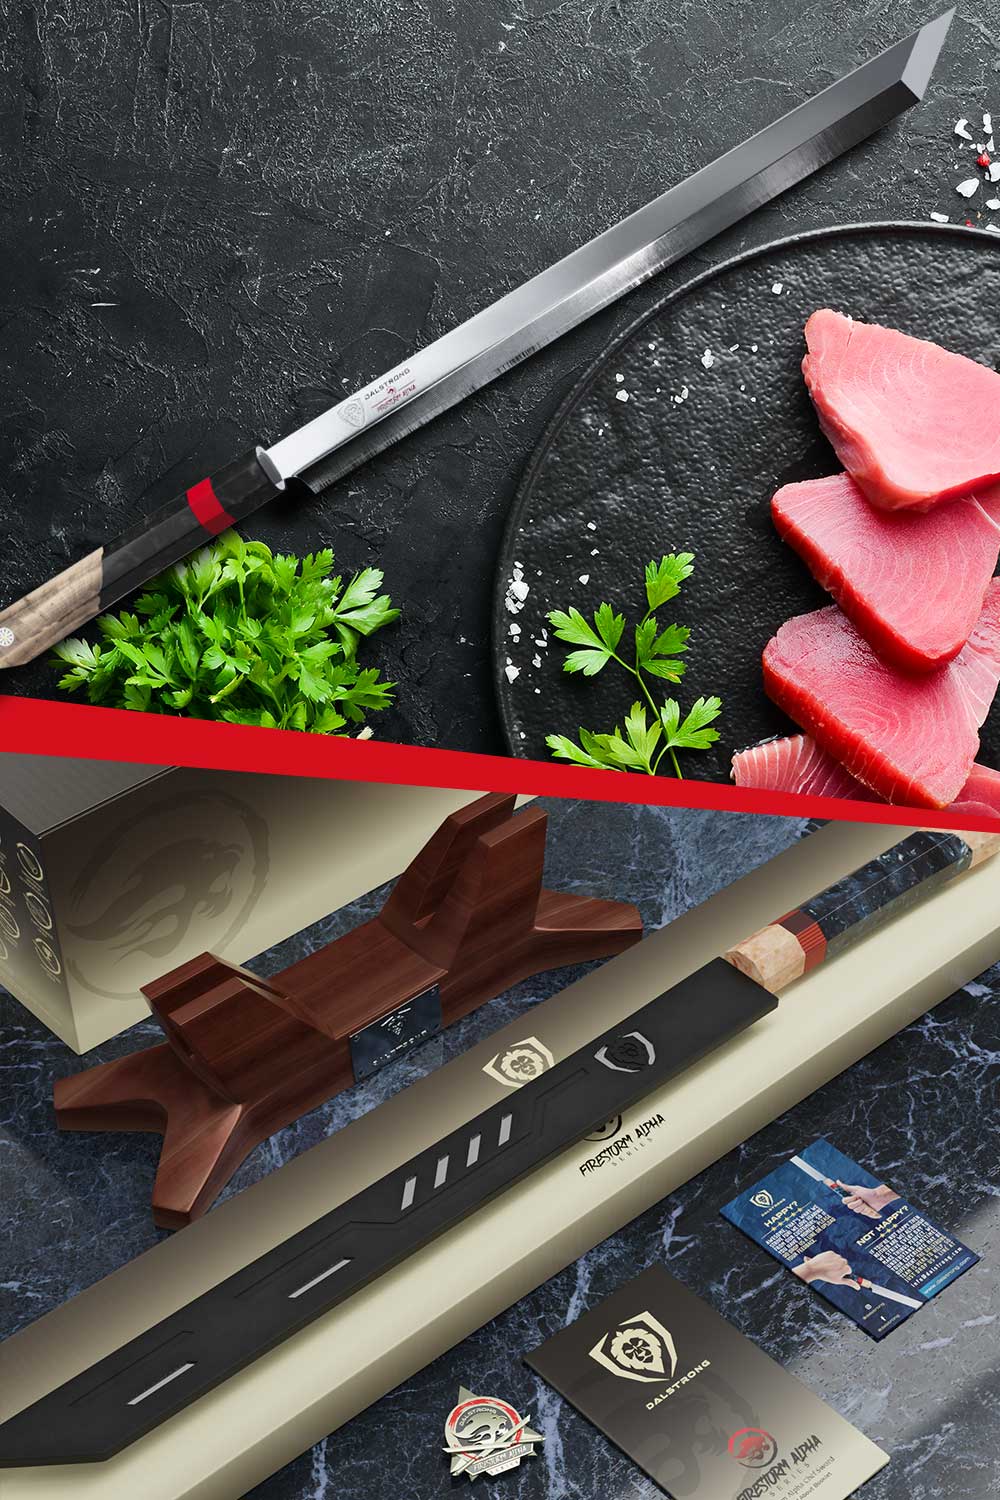 Dalstrong firestorm alpha series 17 inch helios slicer knife with stand and sheath outside it's premium packaging.